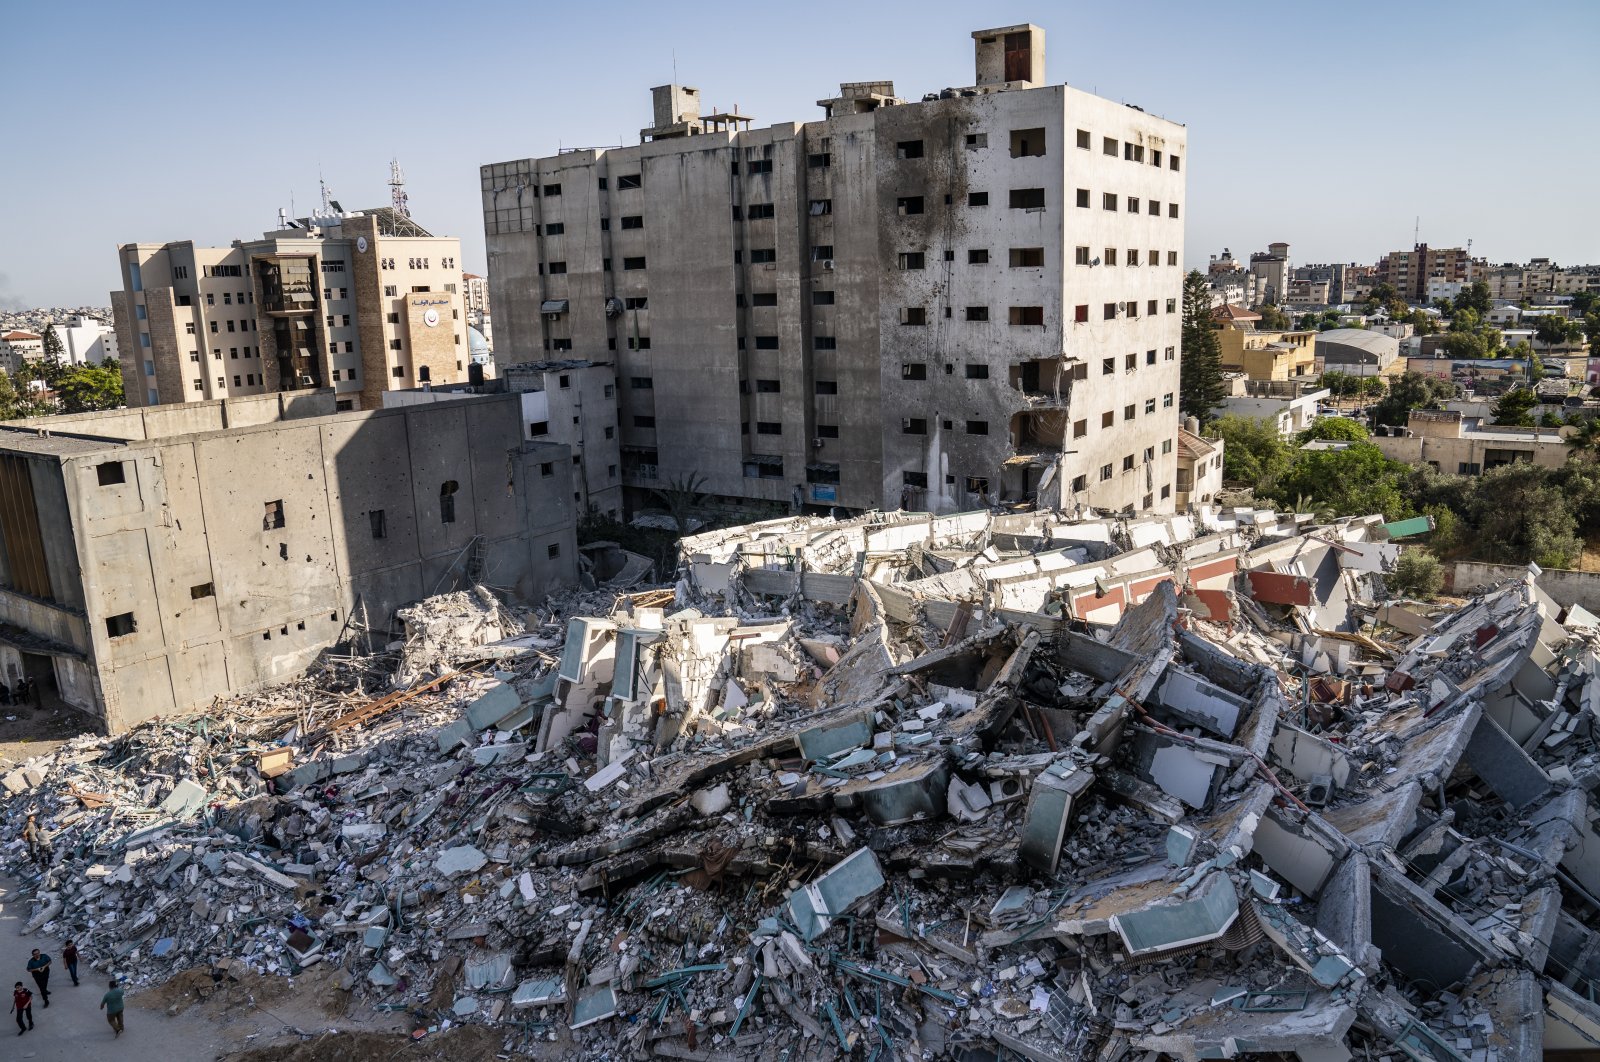 People walk past the rubble of the 12-story al-Jalaa building that was destroyed in an Israeli airstrike, having before been the Associated Press bureau in Gaza City for 15 years and housed dozens of families, in Gaza City, the Gaza Strip, Palestine, May 21, 2021. (AP Photo)